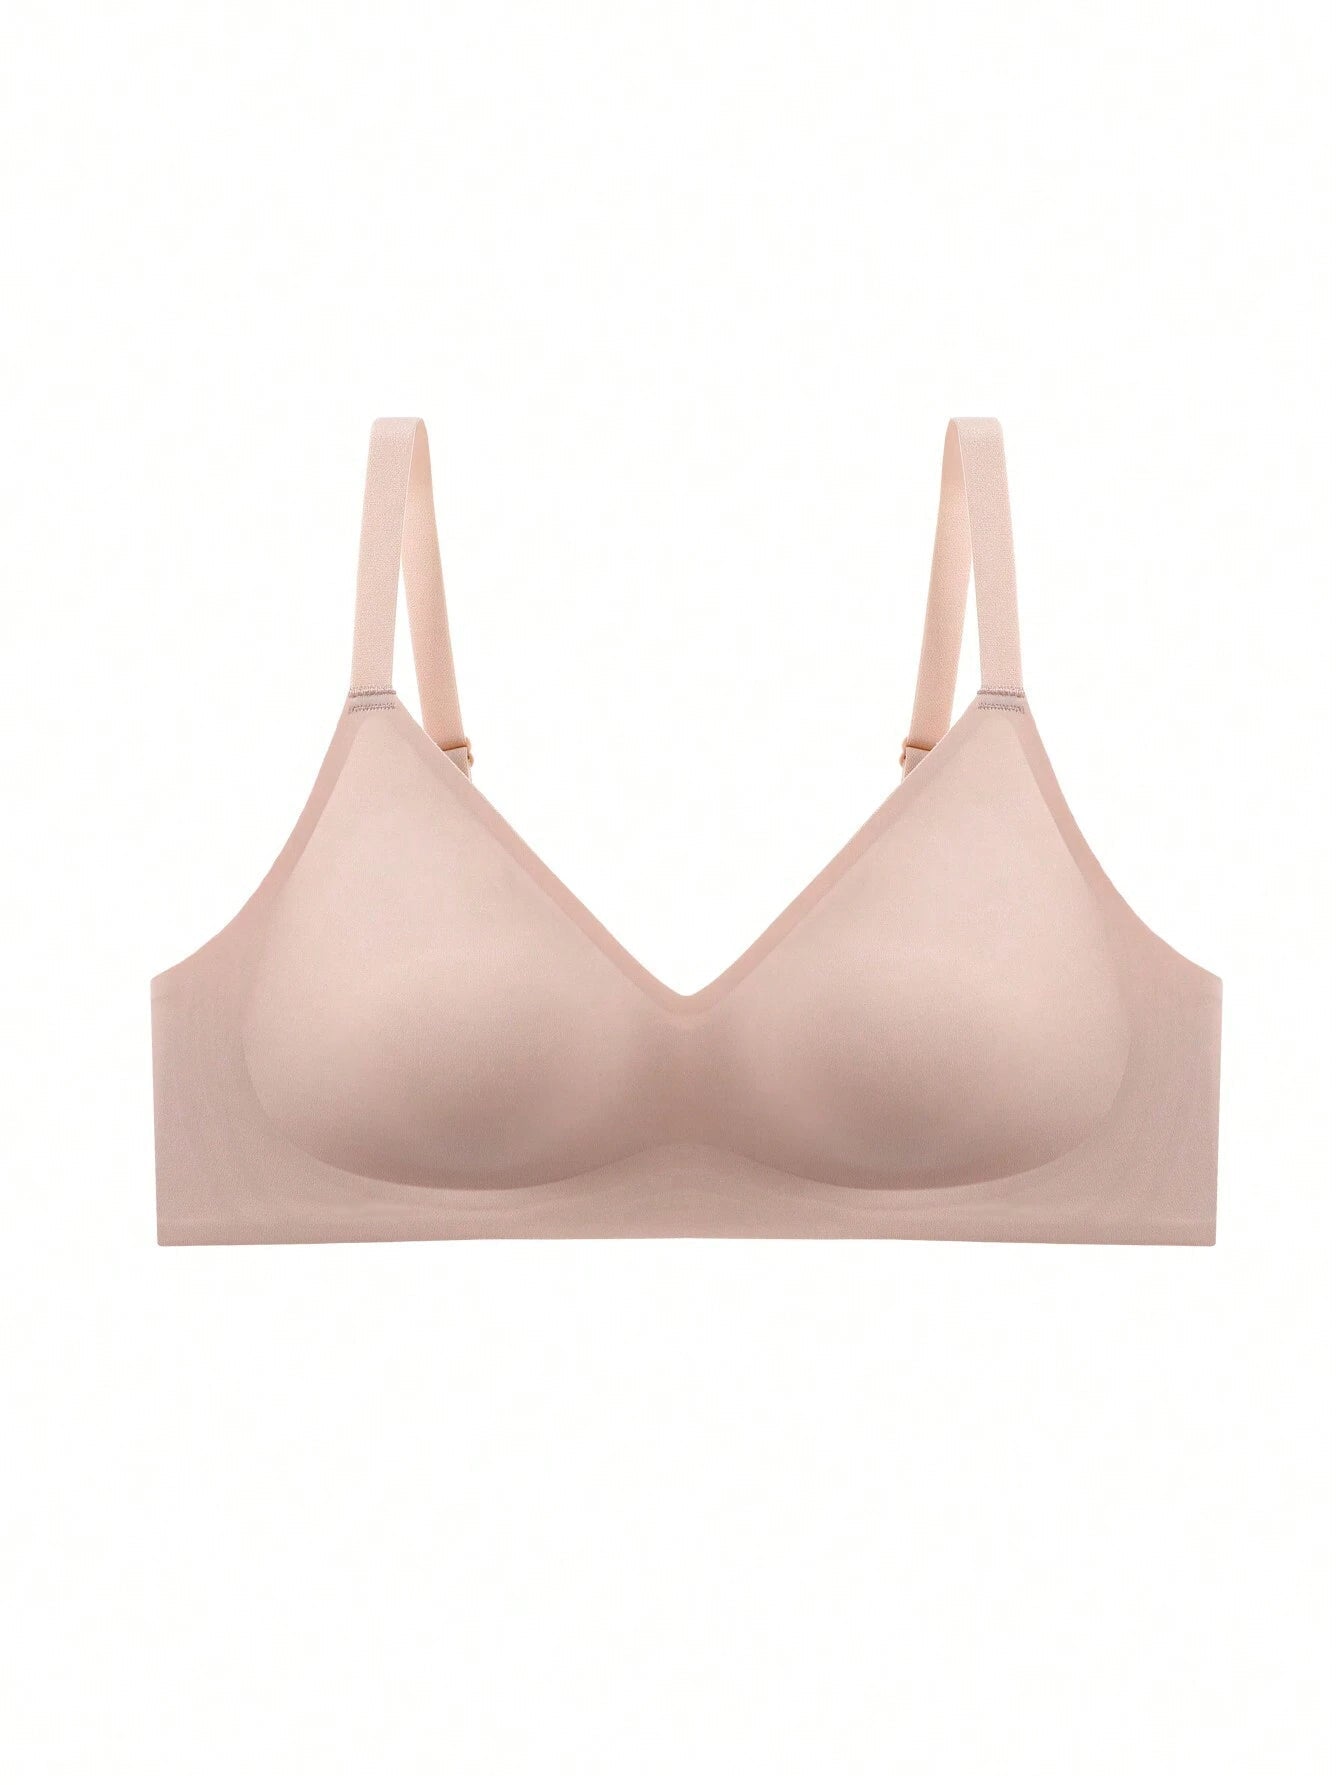 Push Up Seamless Bra For Small Breasts Women Padded 4cm Thick Cup Wire Free Chest Gathered Bra Tops Beige